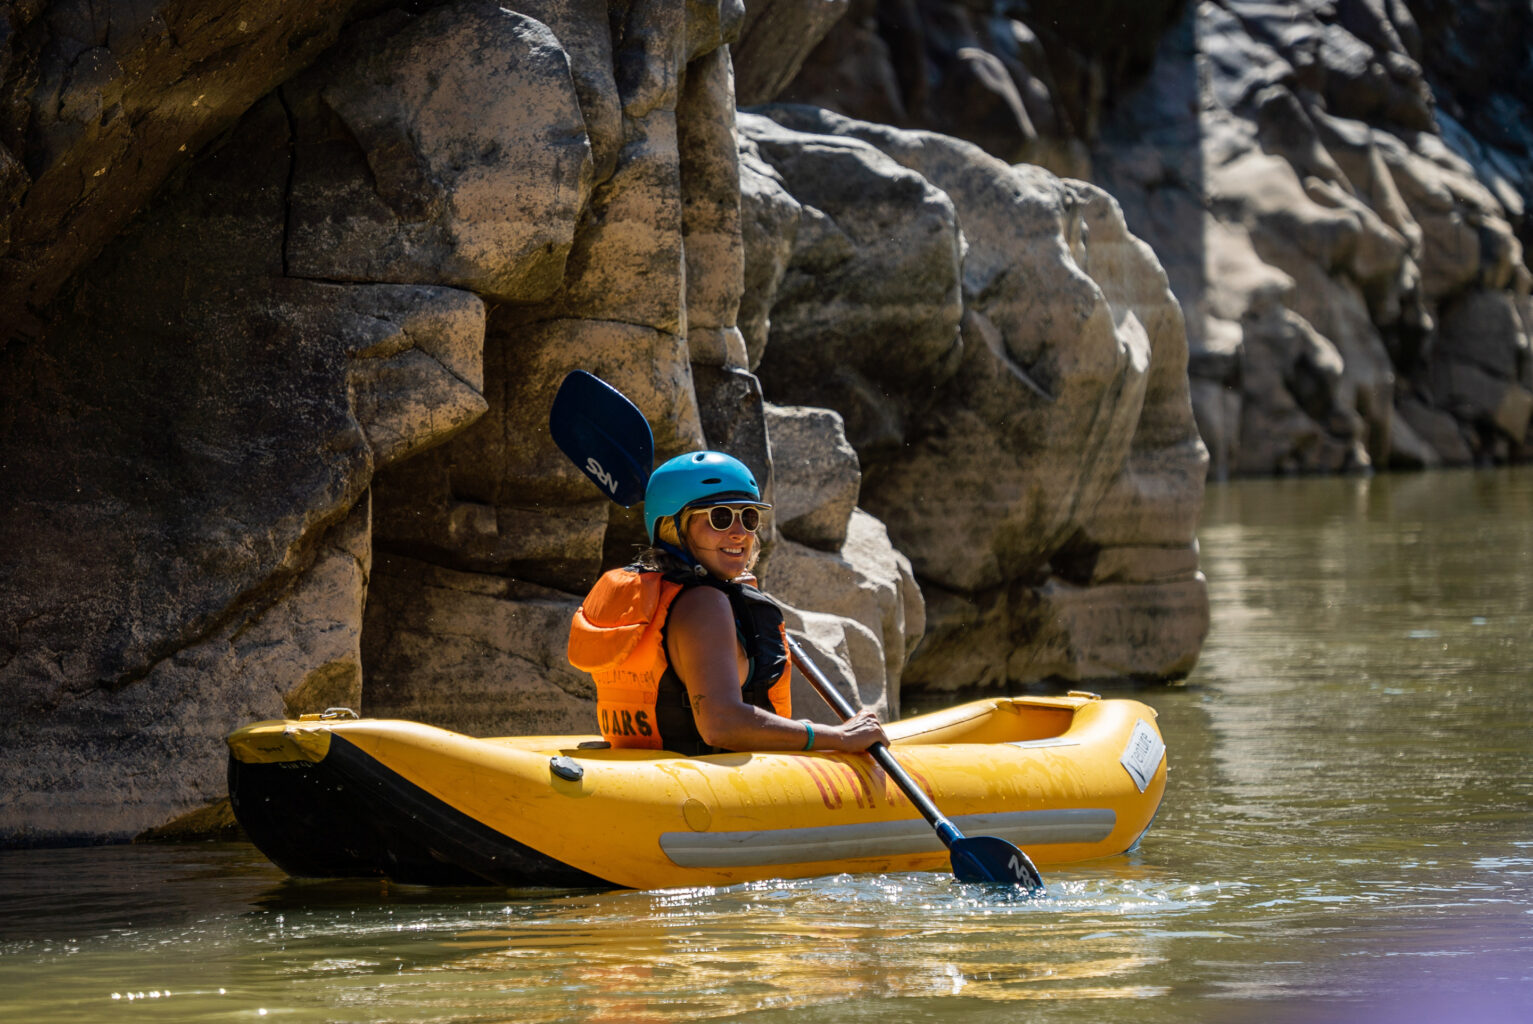 A young woman in helmet and sunglasses looks back at the camera as she paddles her inflatable kayak in calm water close to a weathered cliff face in Westwater Canyon, UT on an OARS rafting adventure